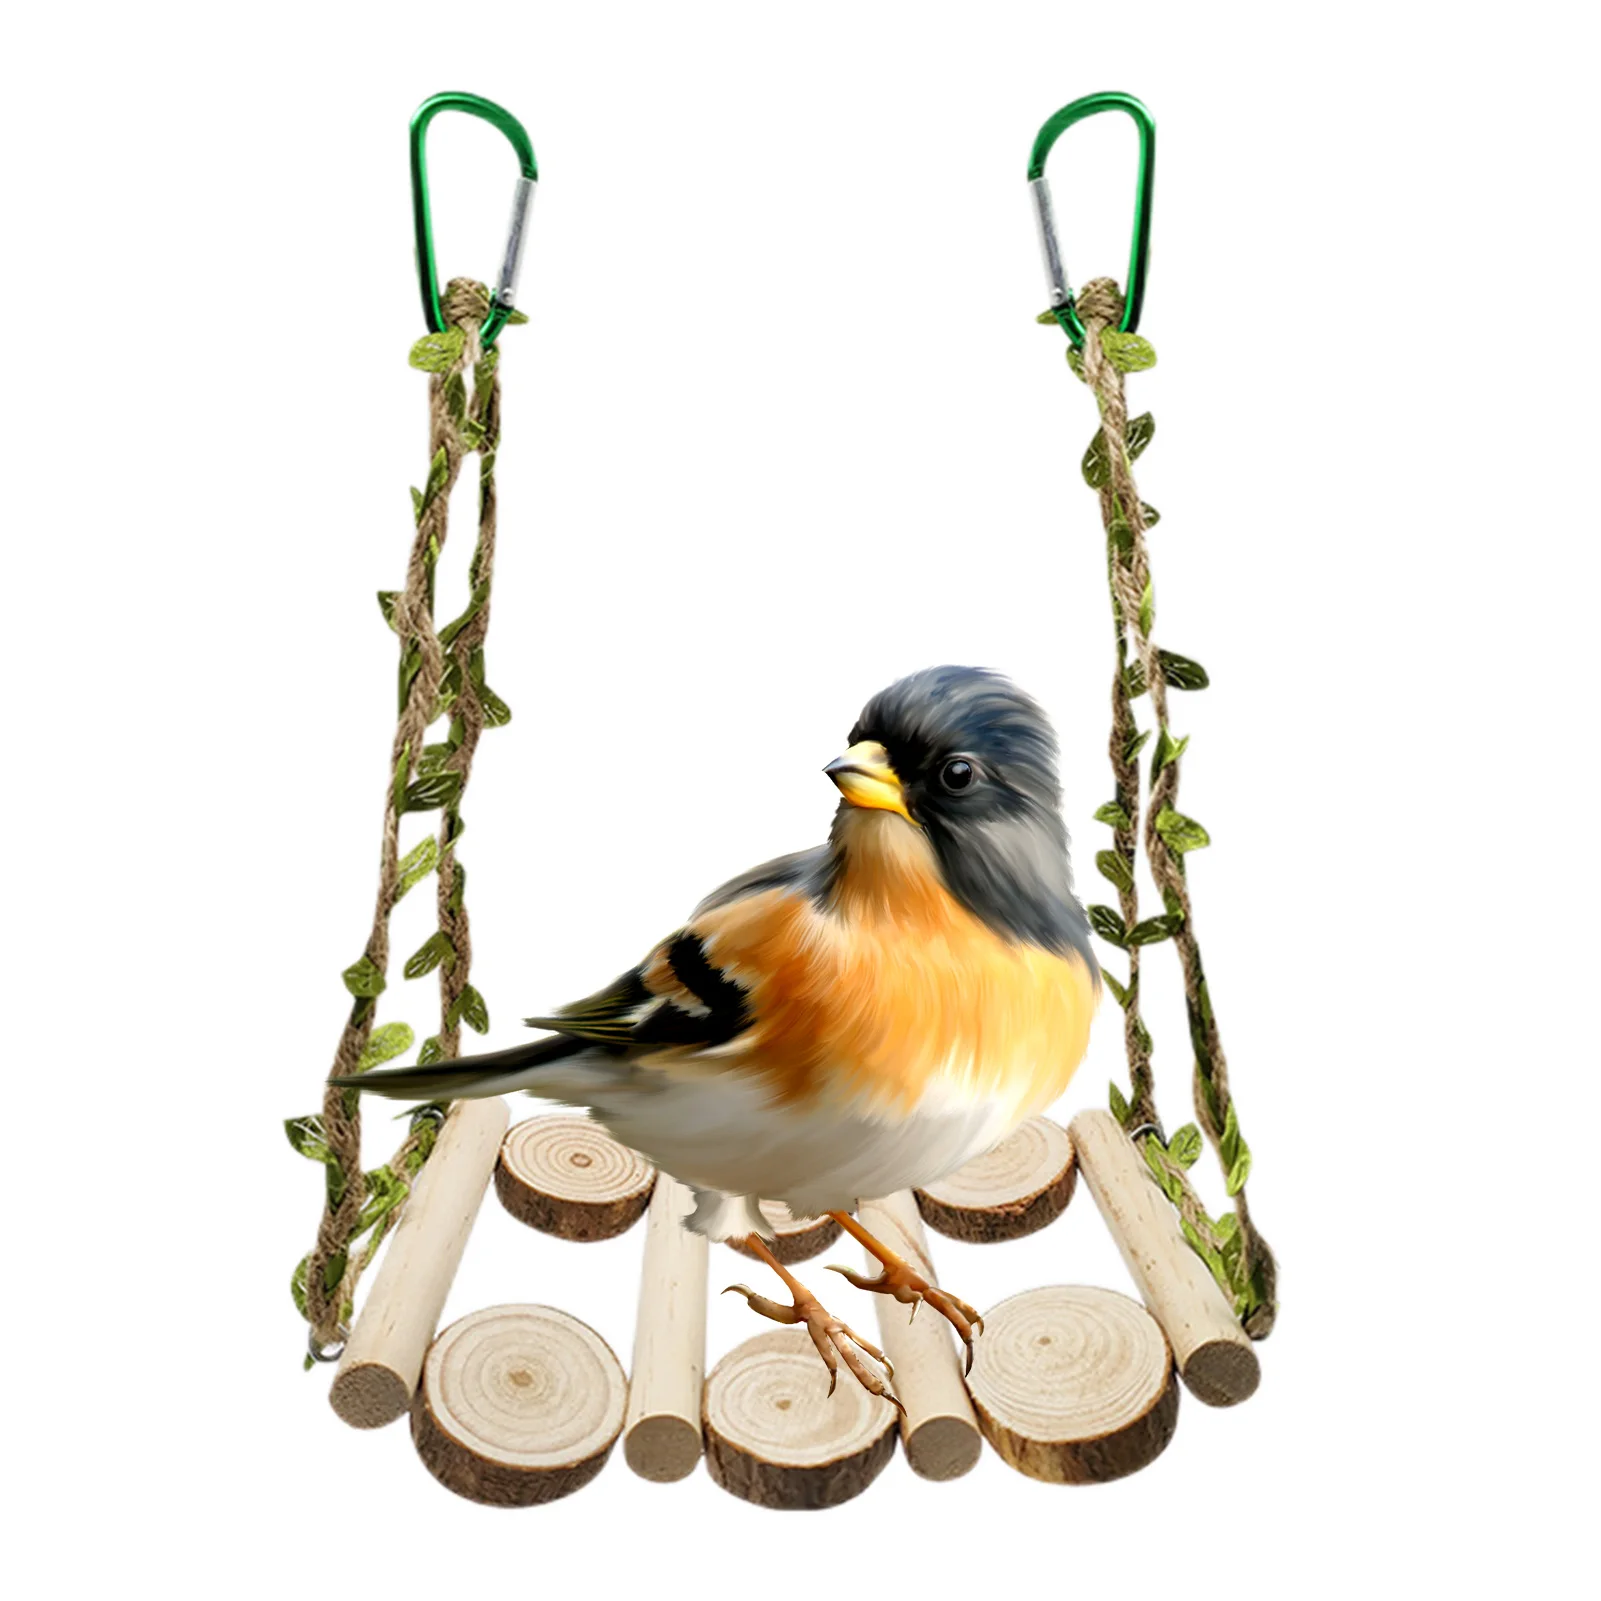 Bird Hanging Swing Toys Natural Wood Perches Bird Toy for Hamster Gerbil Mouse wzpi